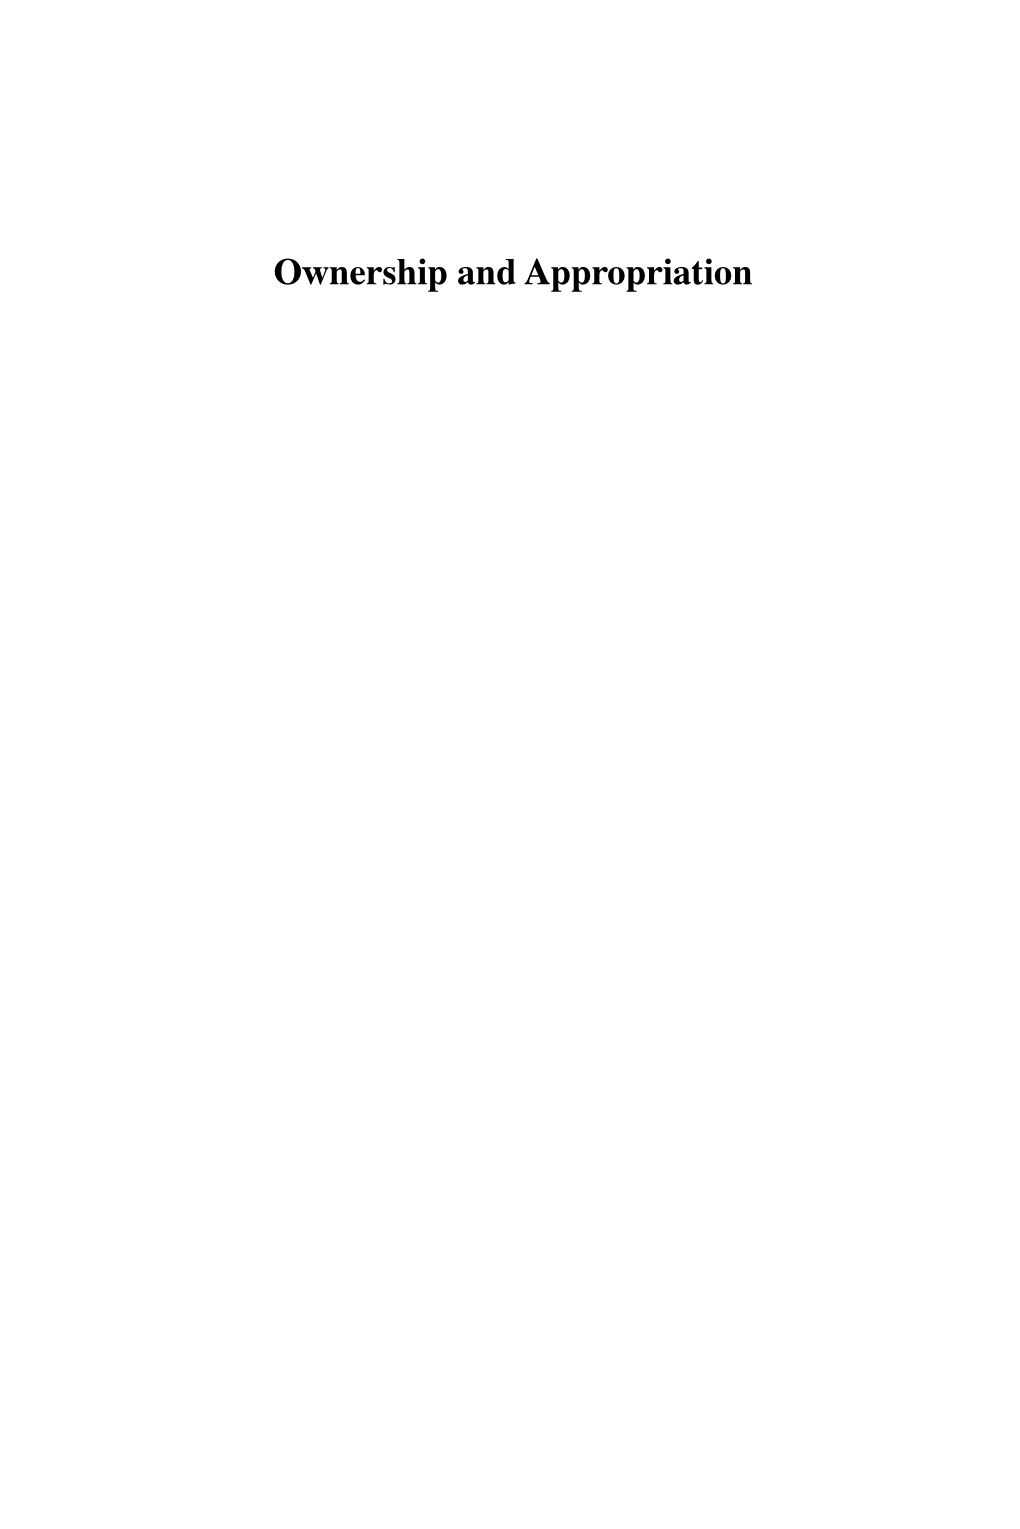 Ownership and Appropriation ASA Monographs ISSN 0066–9679 the Relevance of Models for Social Anthropology, Ed M